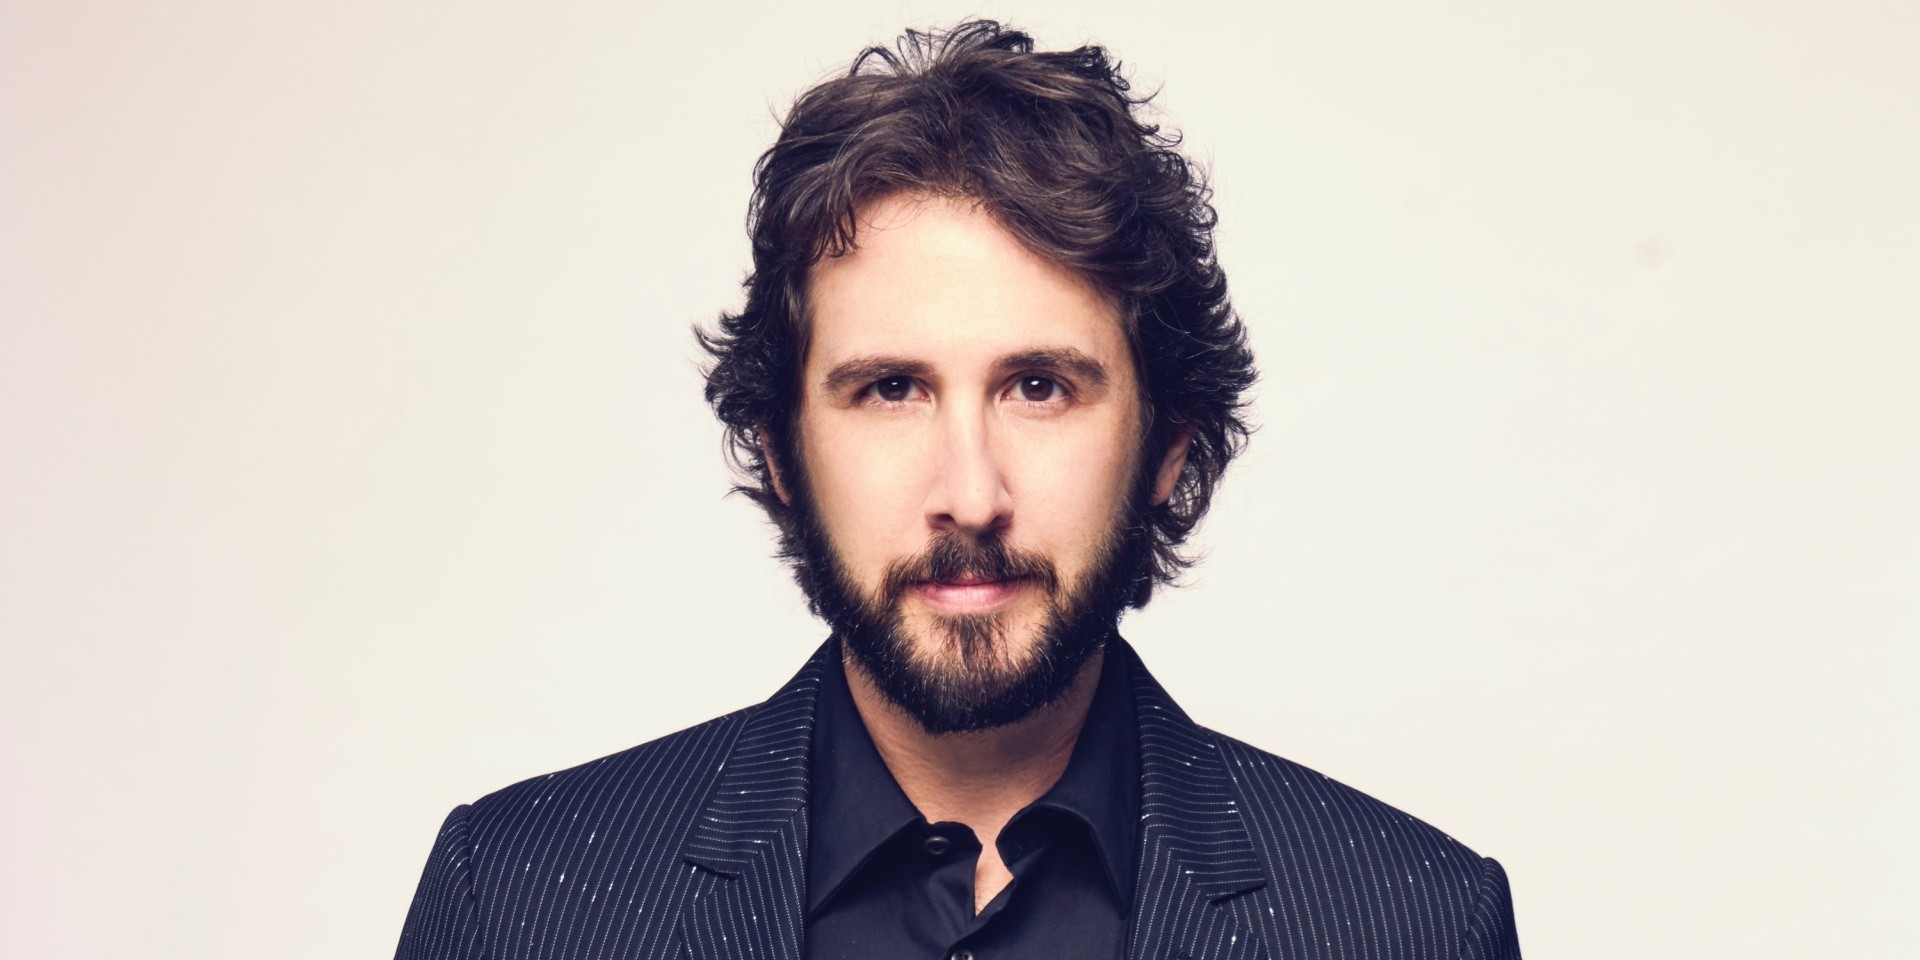 "Fads will come and go but a great song will withstand everything": An interview with Josh Groban